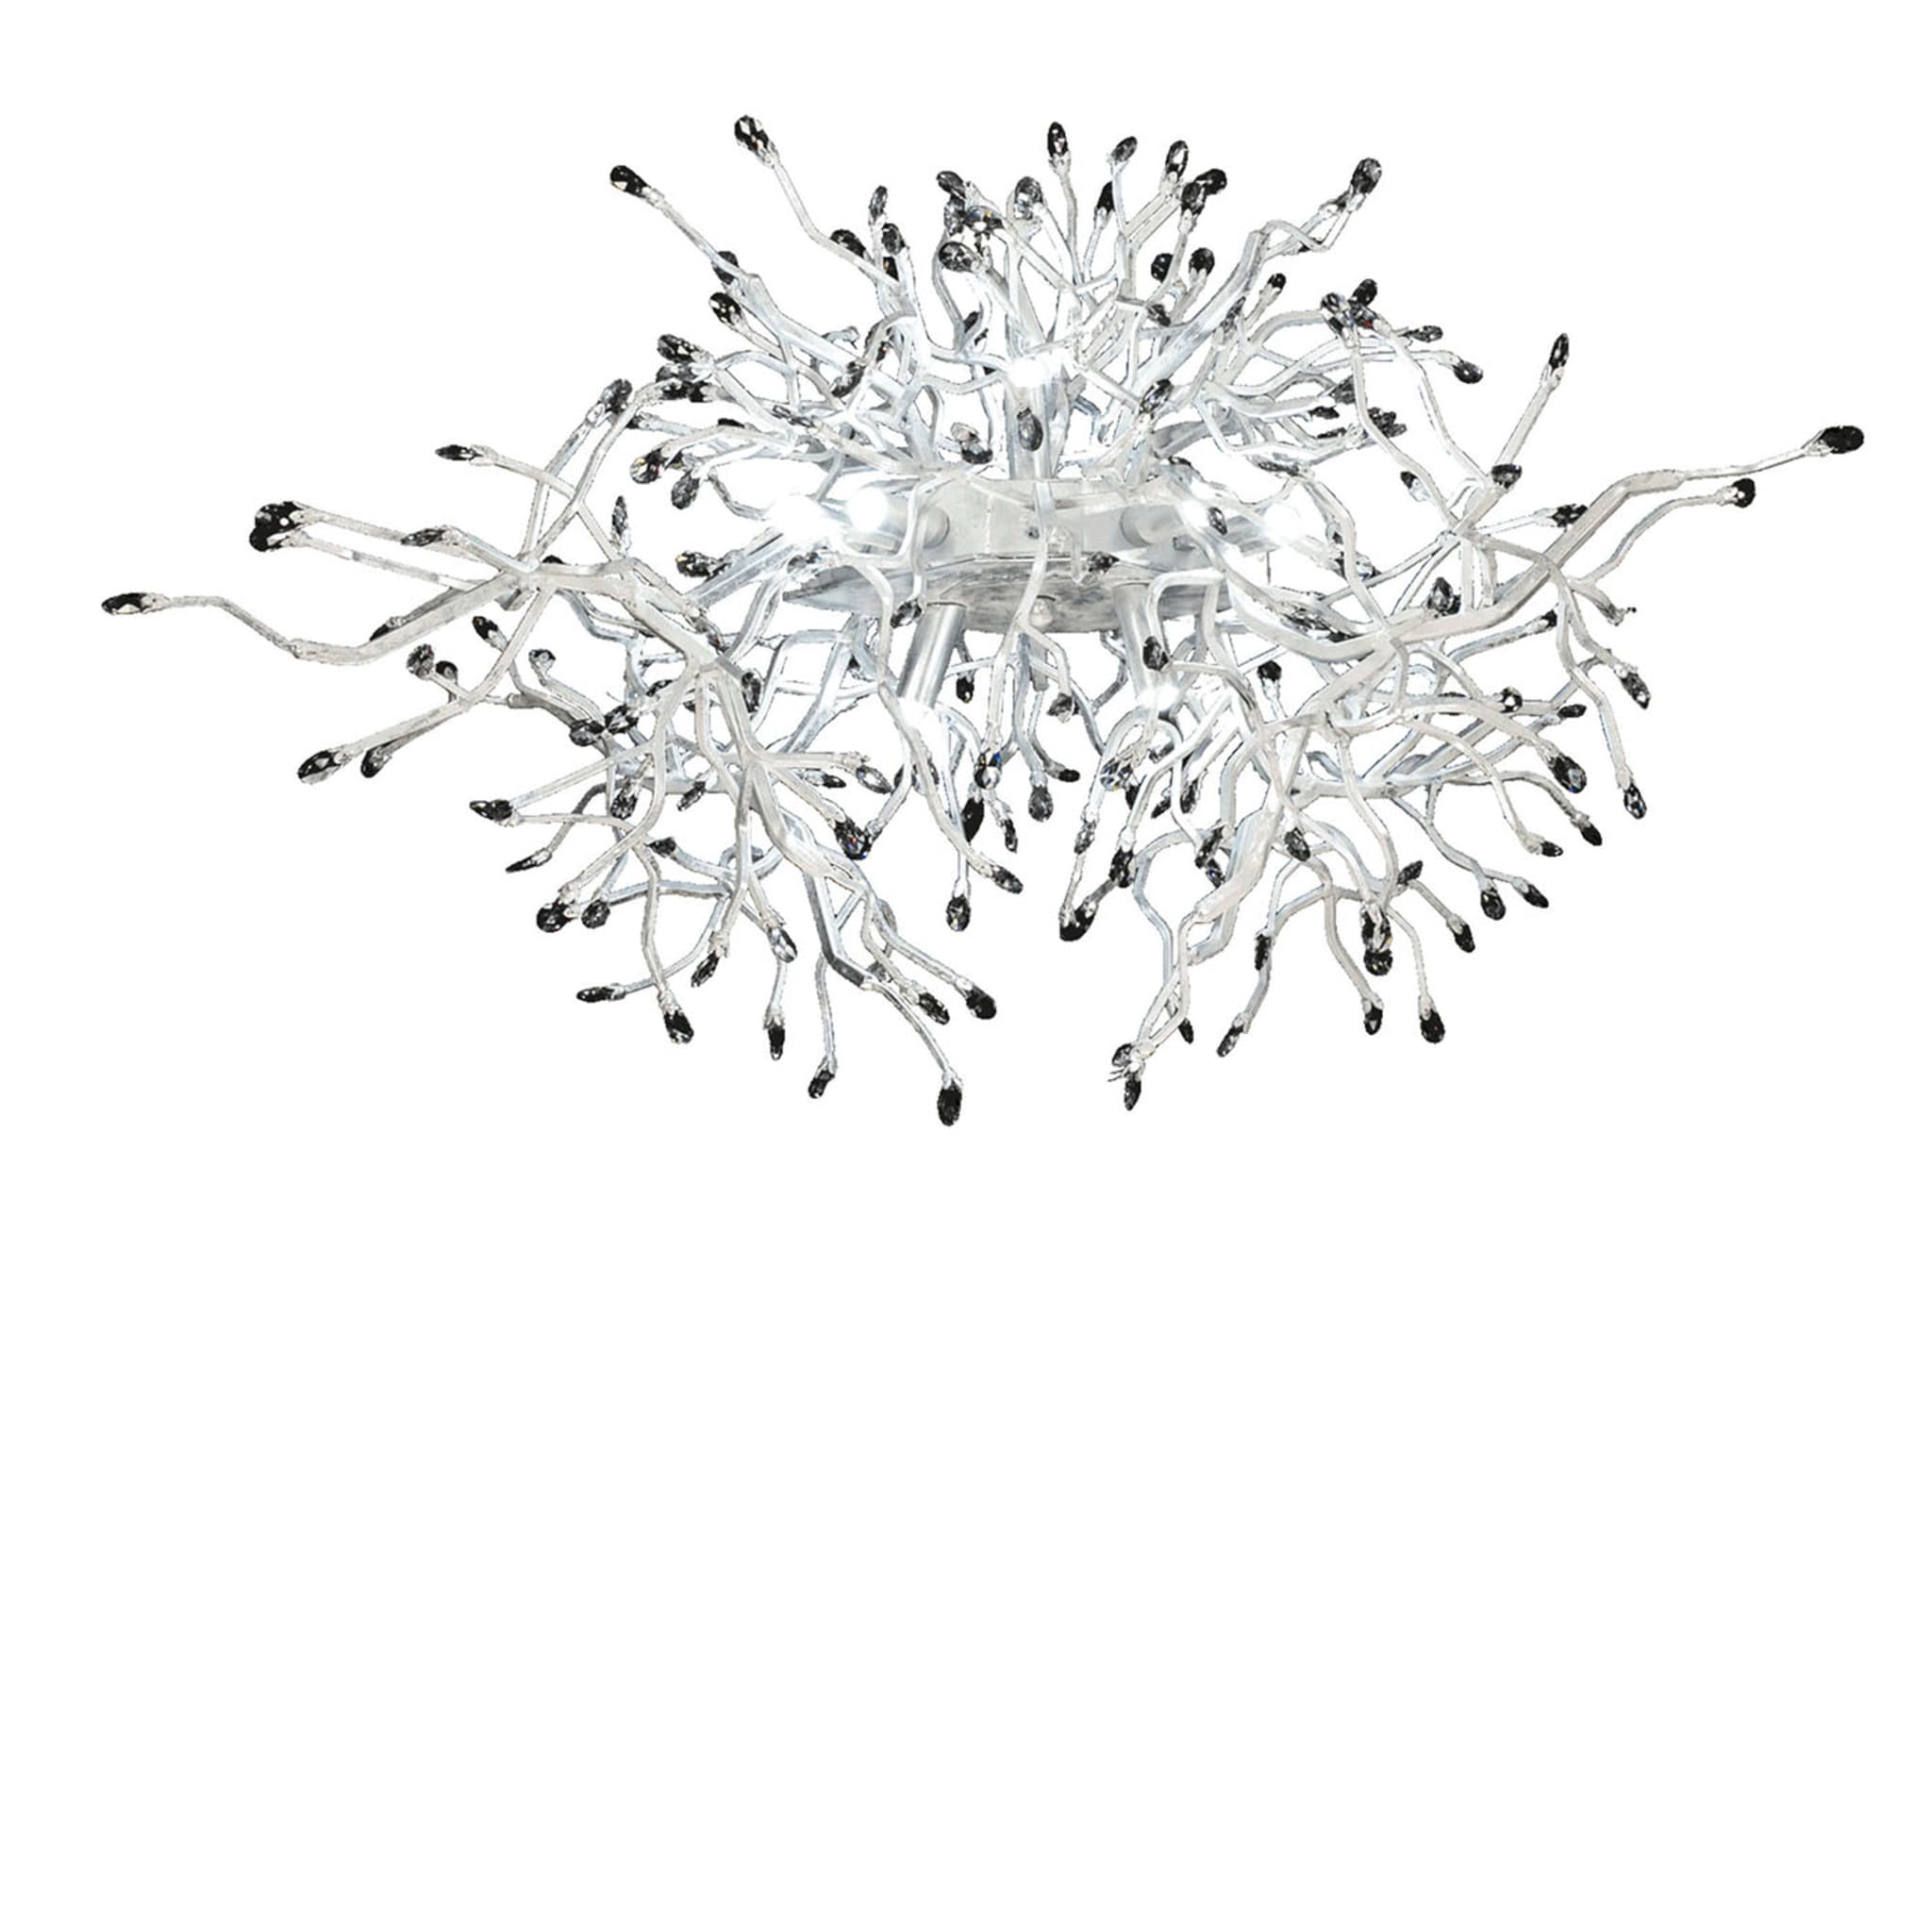 Spidery Silvery Chandelier - Main view